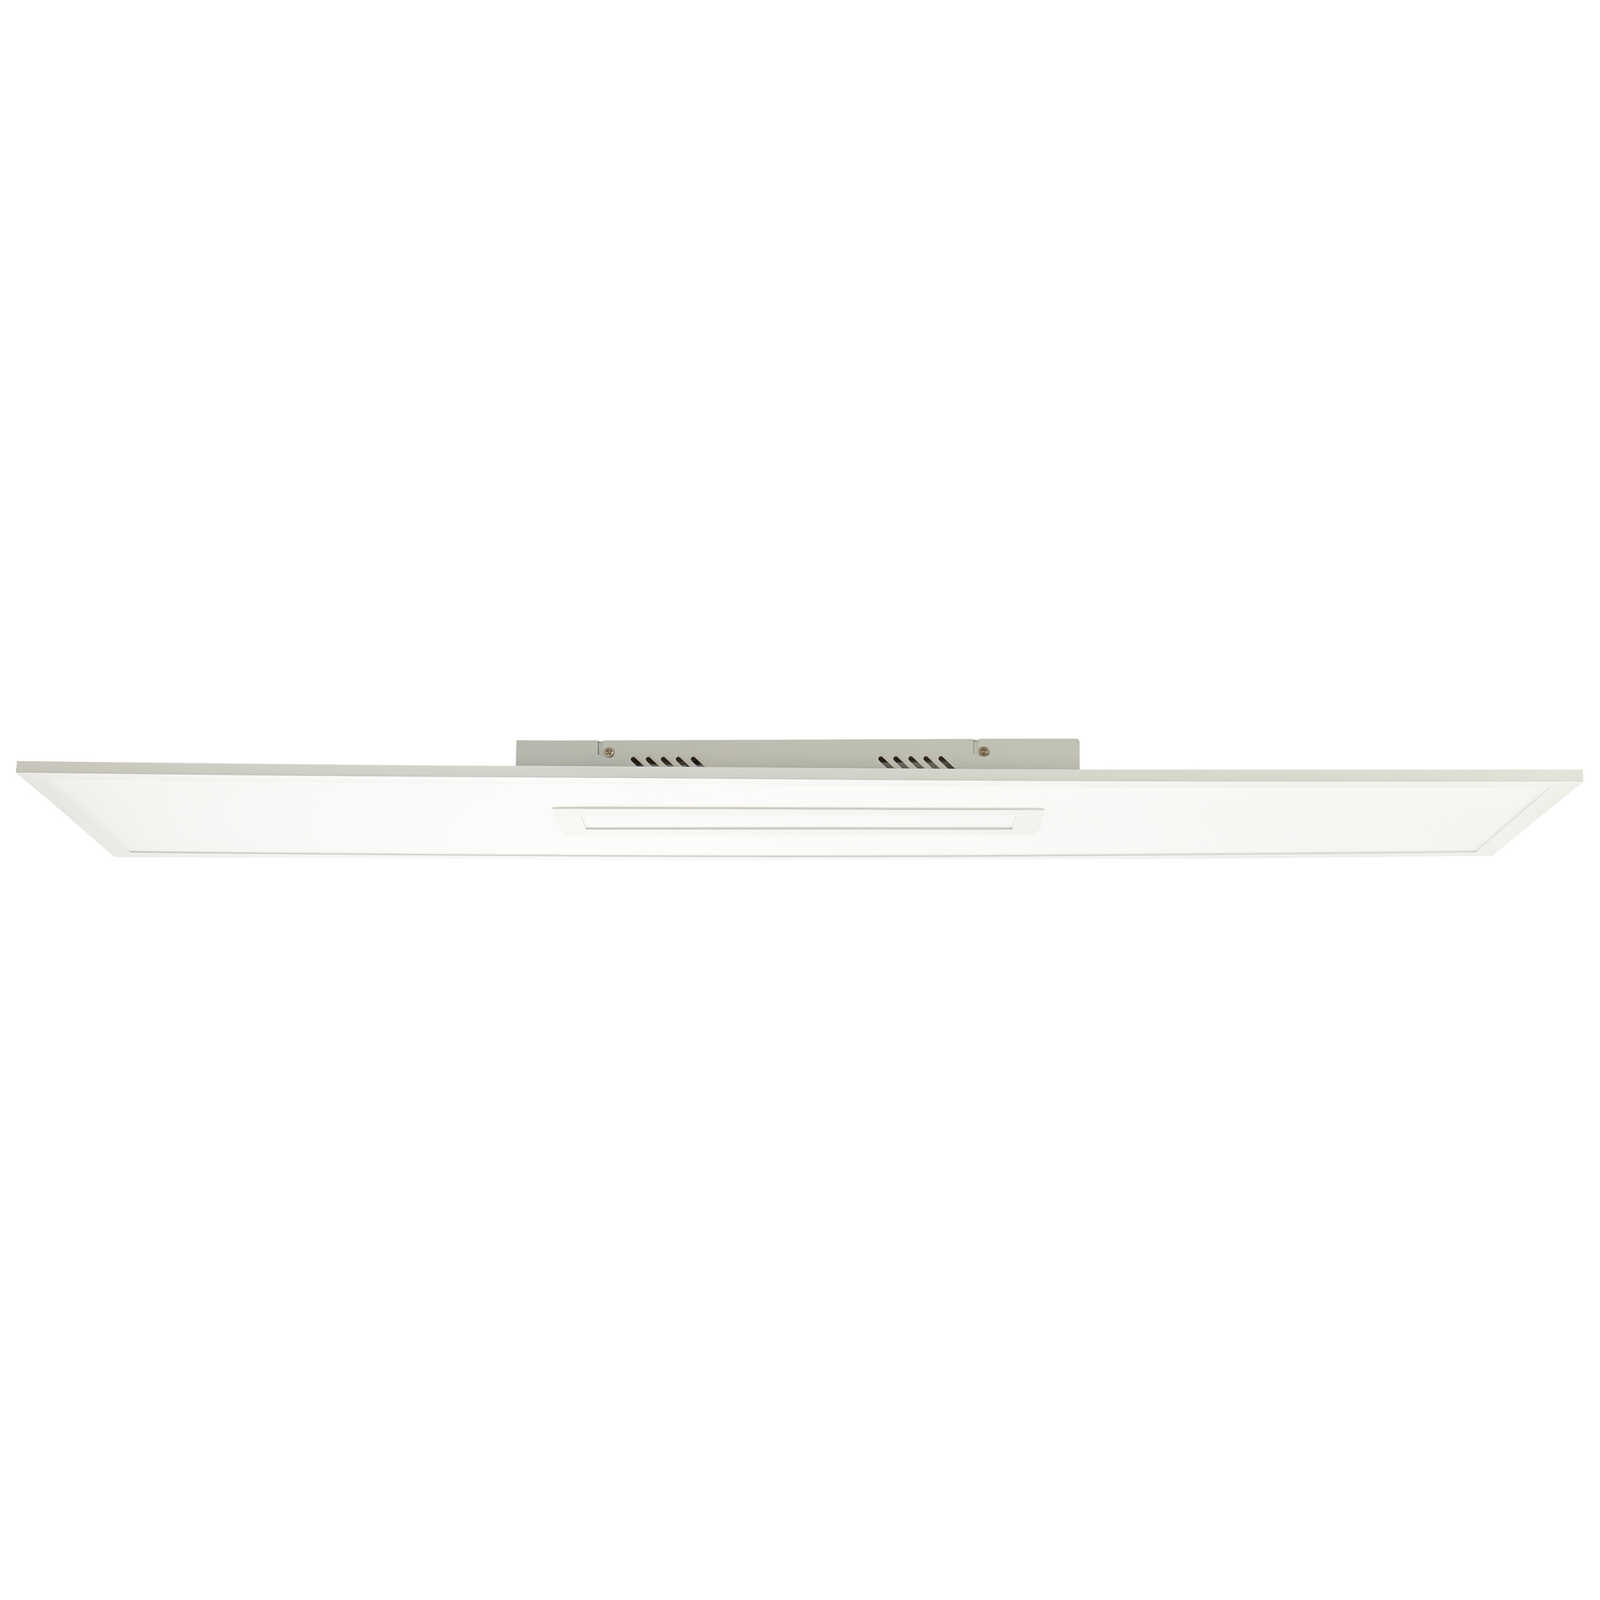             Metal ceiling light - Mads 3 - White
        